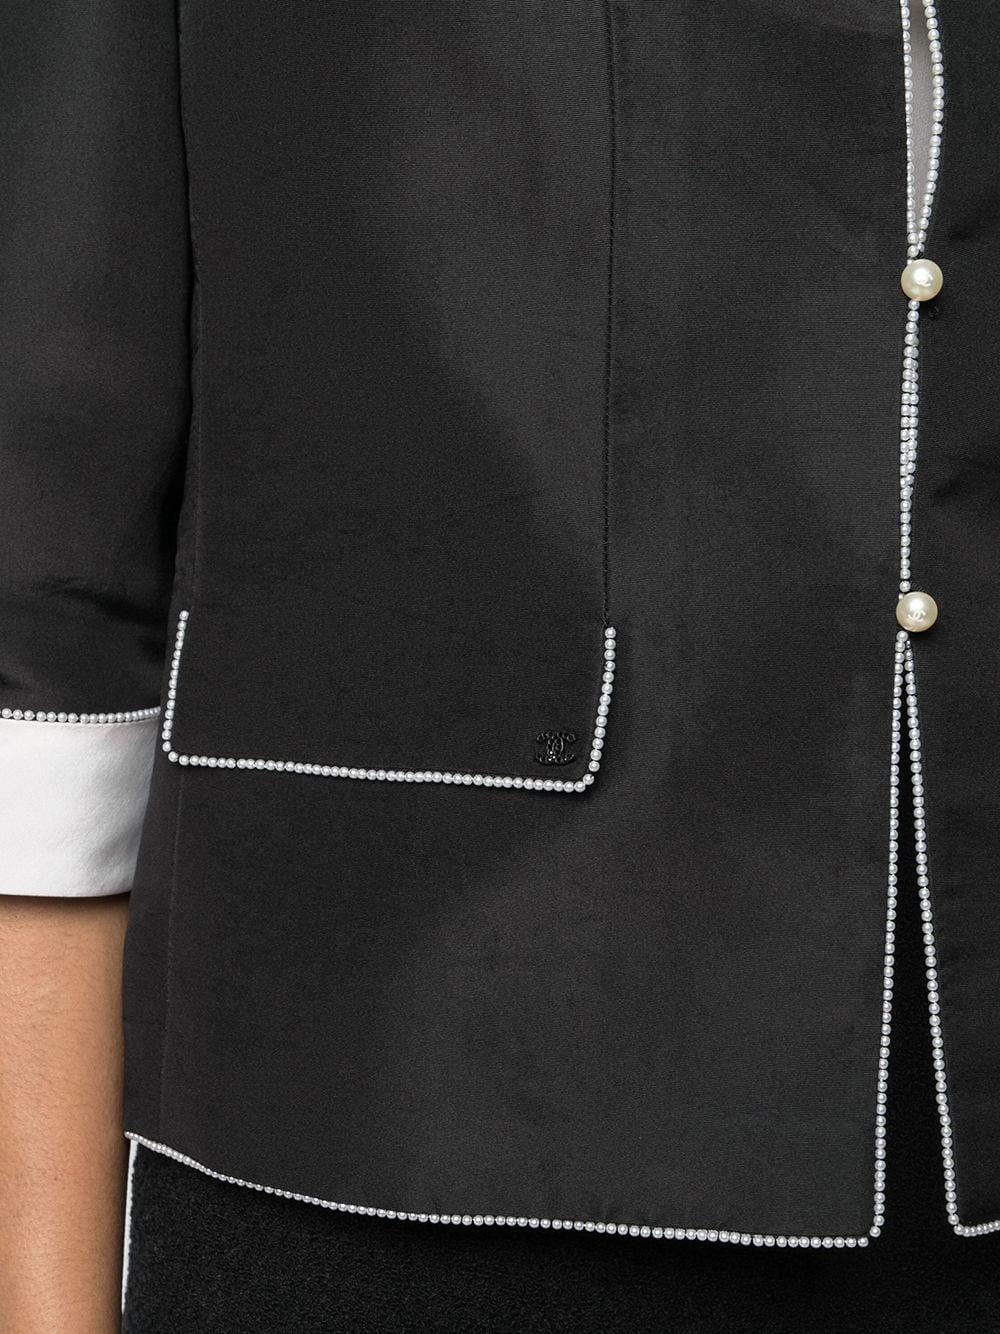 Chanel black silk jacket featuring a faux-pearl trimming, a notched lapels, front faux-pearl button fastening, three-quarter length sleeves, turn-up cuffs, two front flap pockets, a silk lining and a straight hem.
100% silk 
Chanel label size: